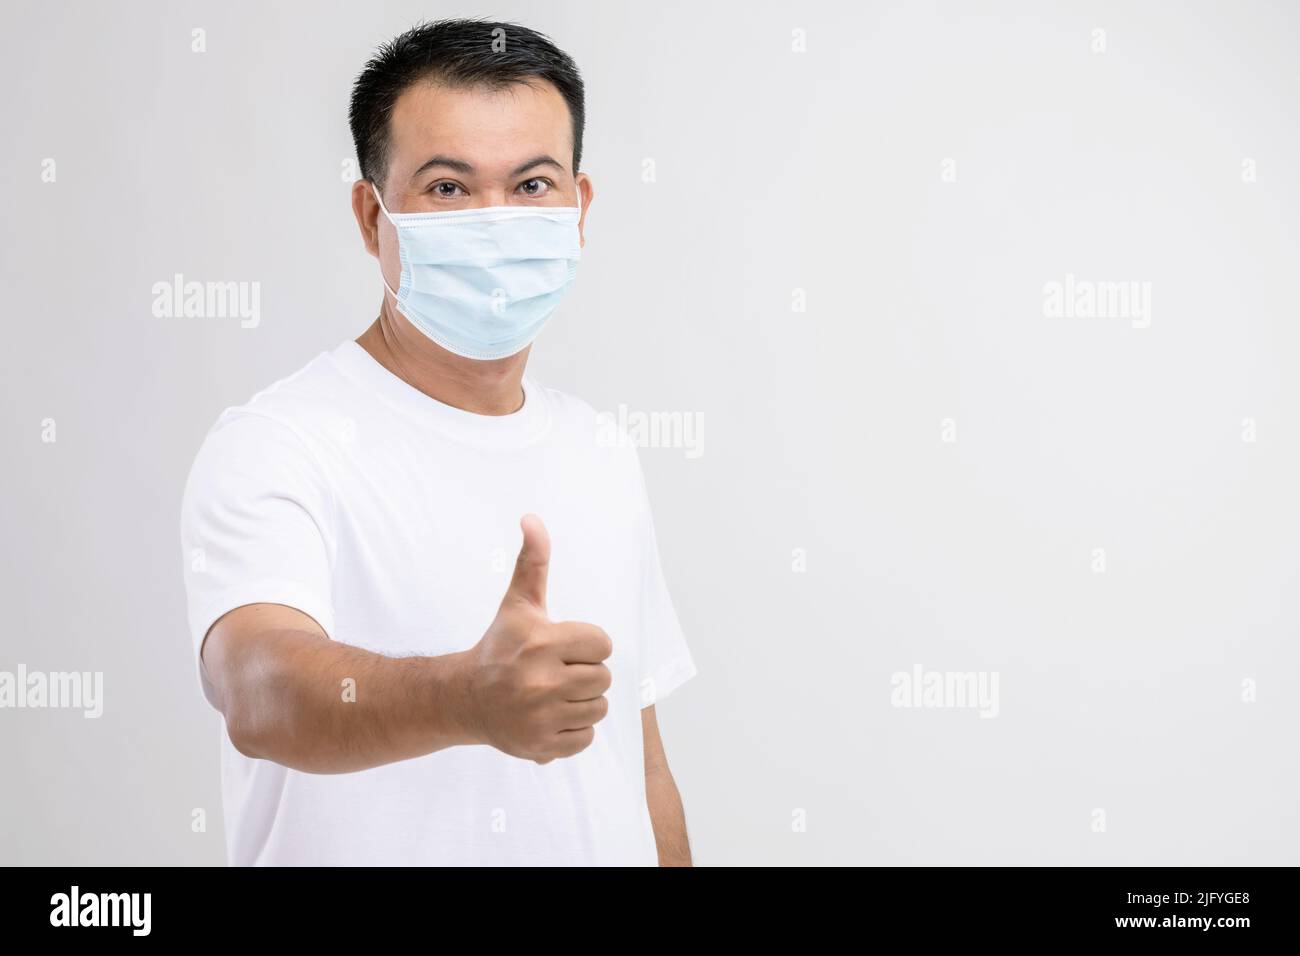 Portrait of Thai man wearing protective face mask to prevent virus studio shot on grey background Stock Photo